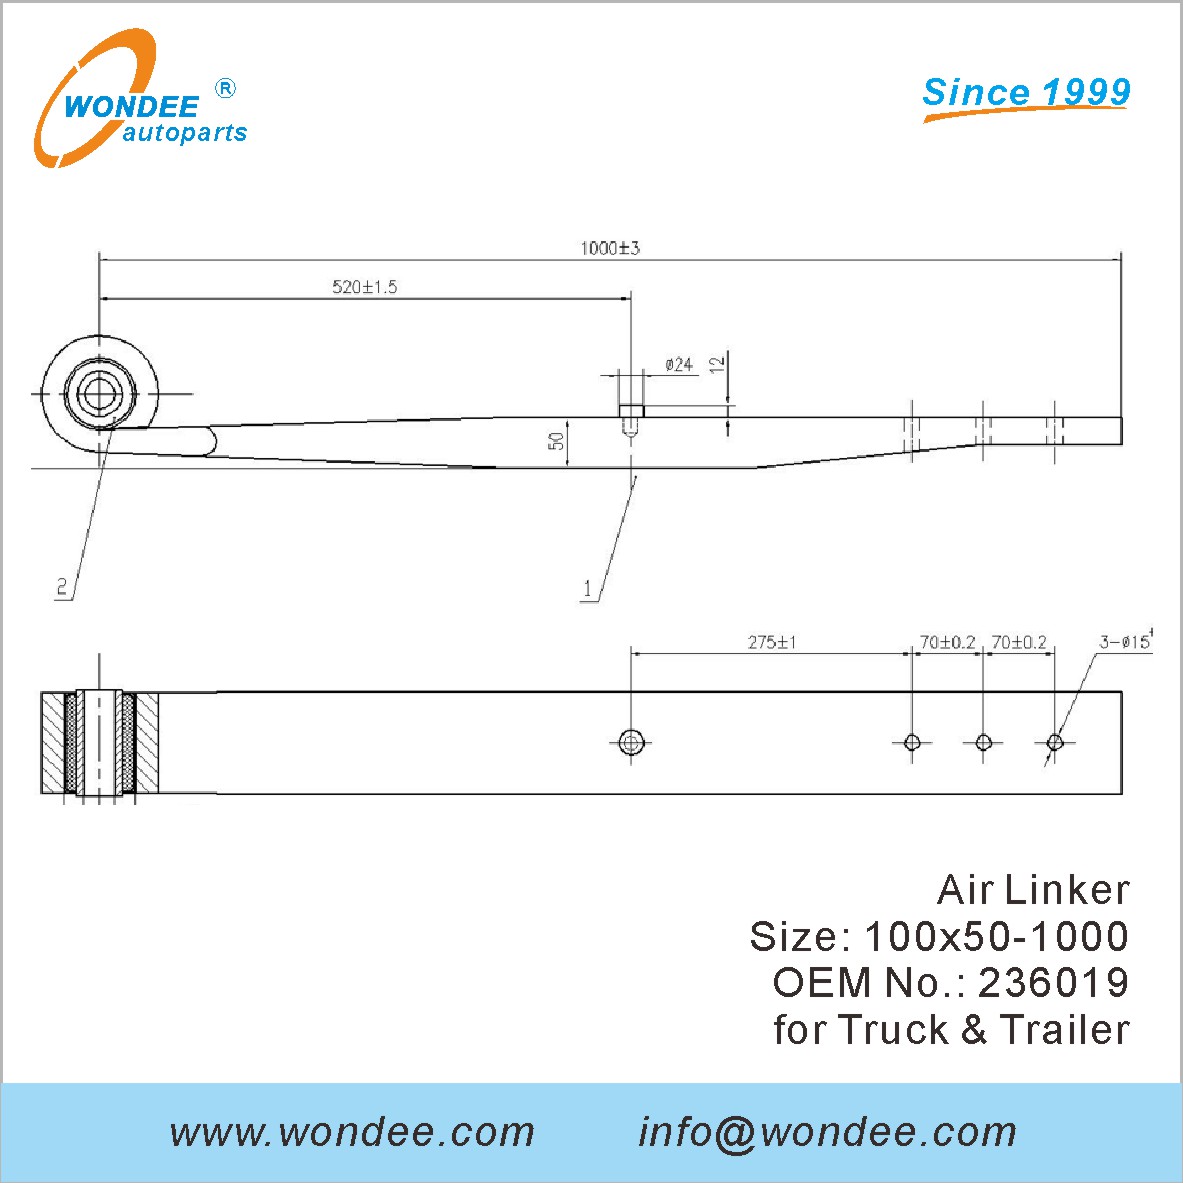 WONDEE Autoparts Air Linker OEM 236019 for Truck & Trailer